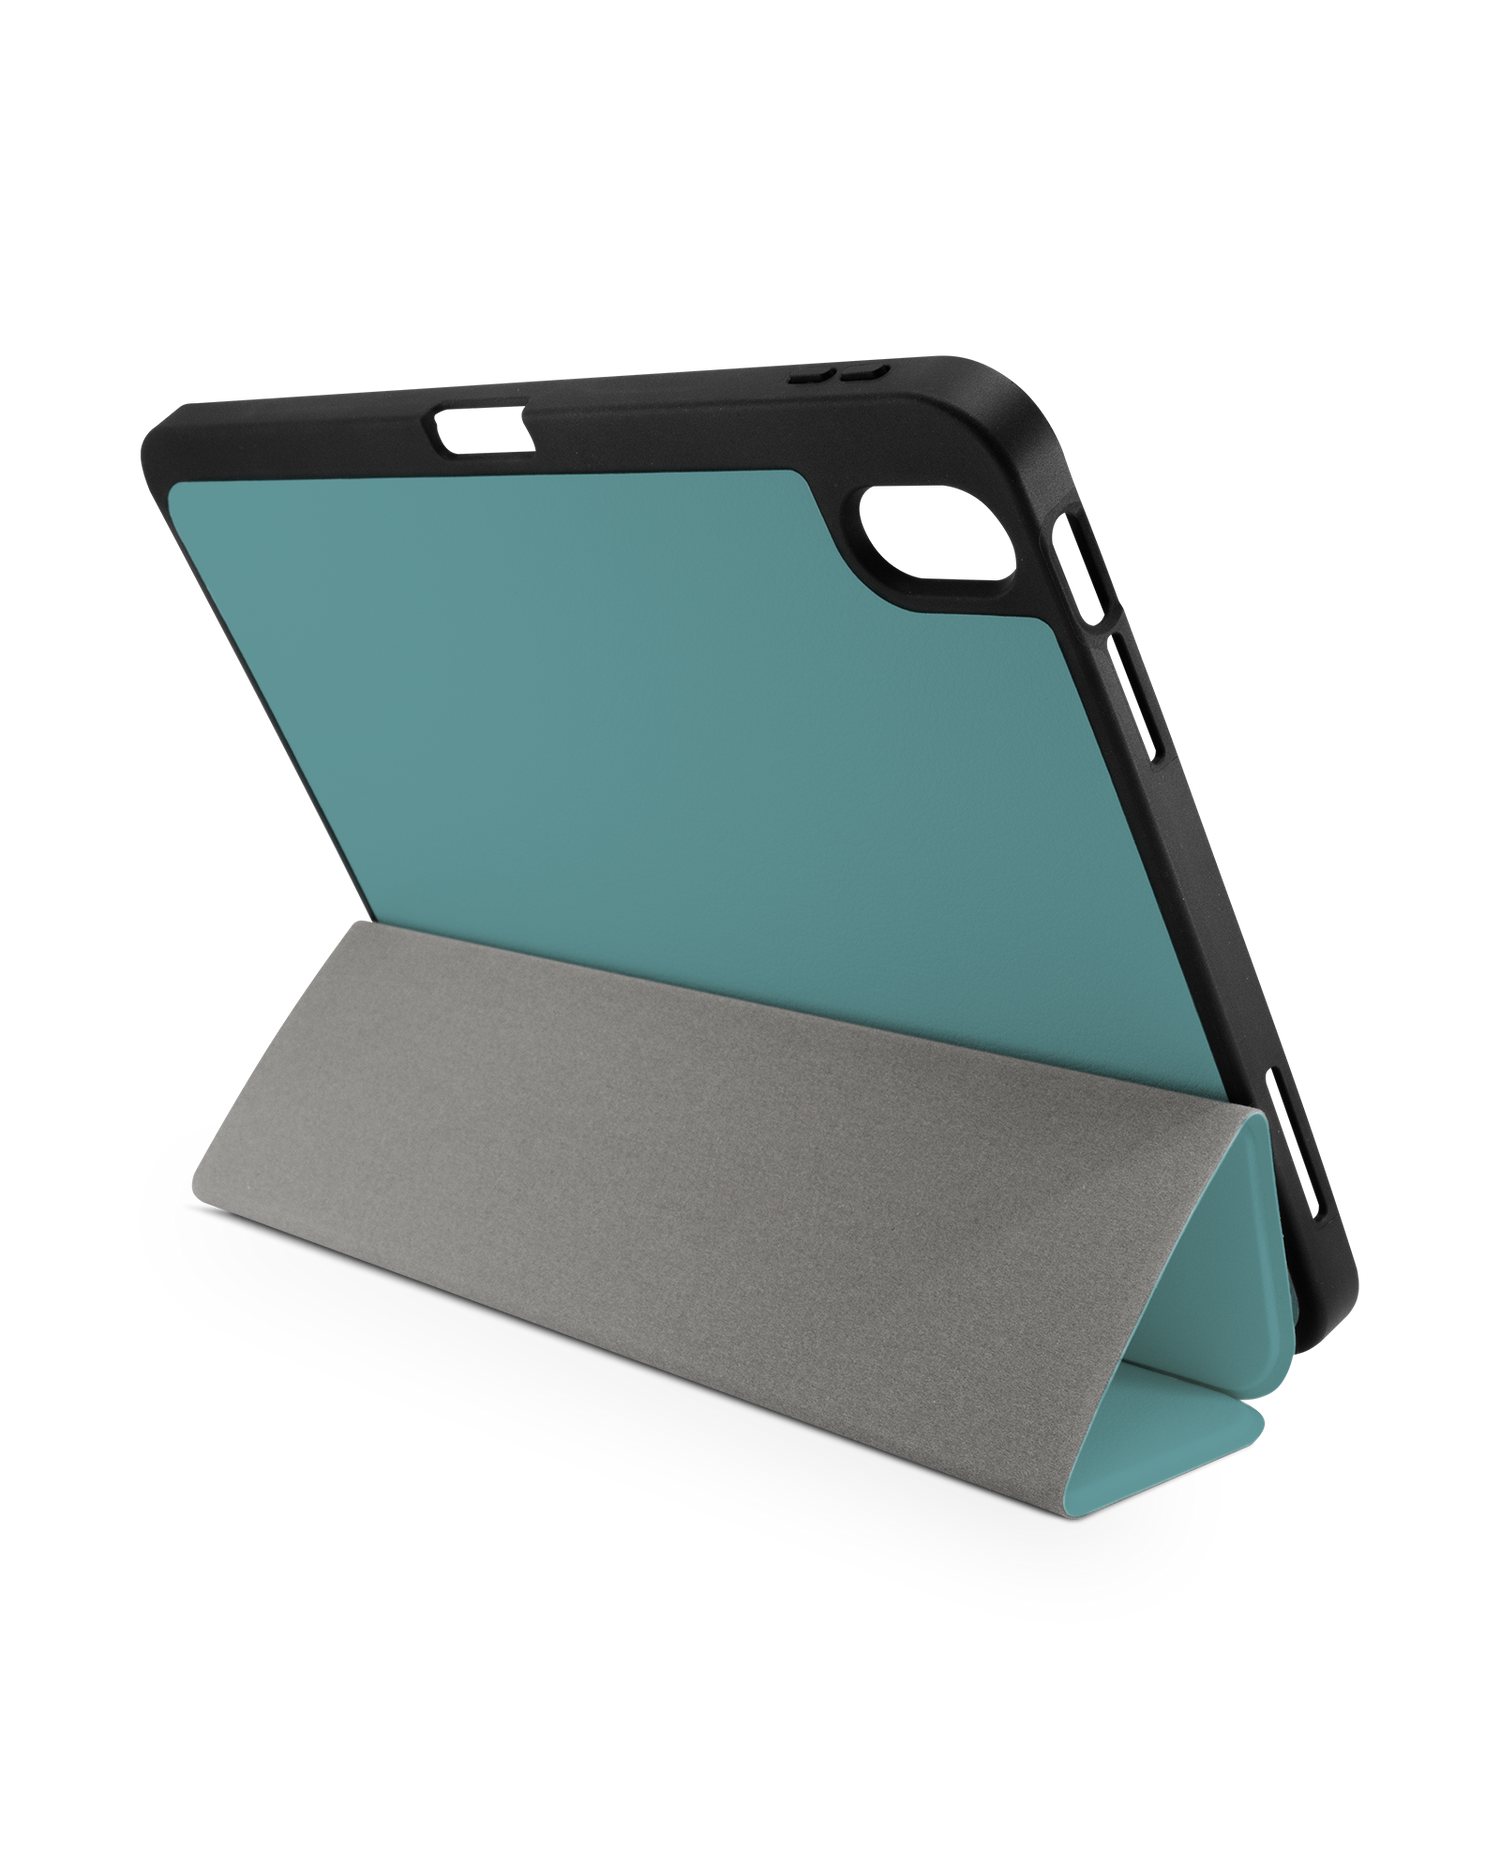 TURQUOISE iPad Case with Pencil Holder for Apple iPad (10th Generation): Set up in landscape format (back view)